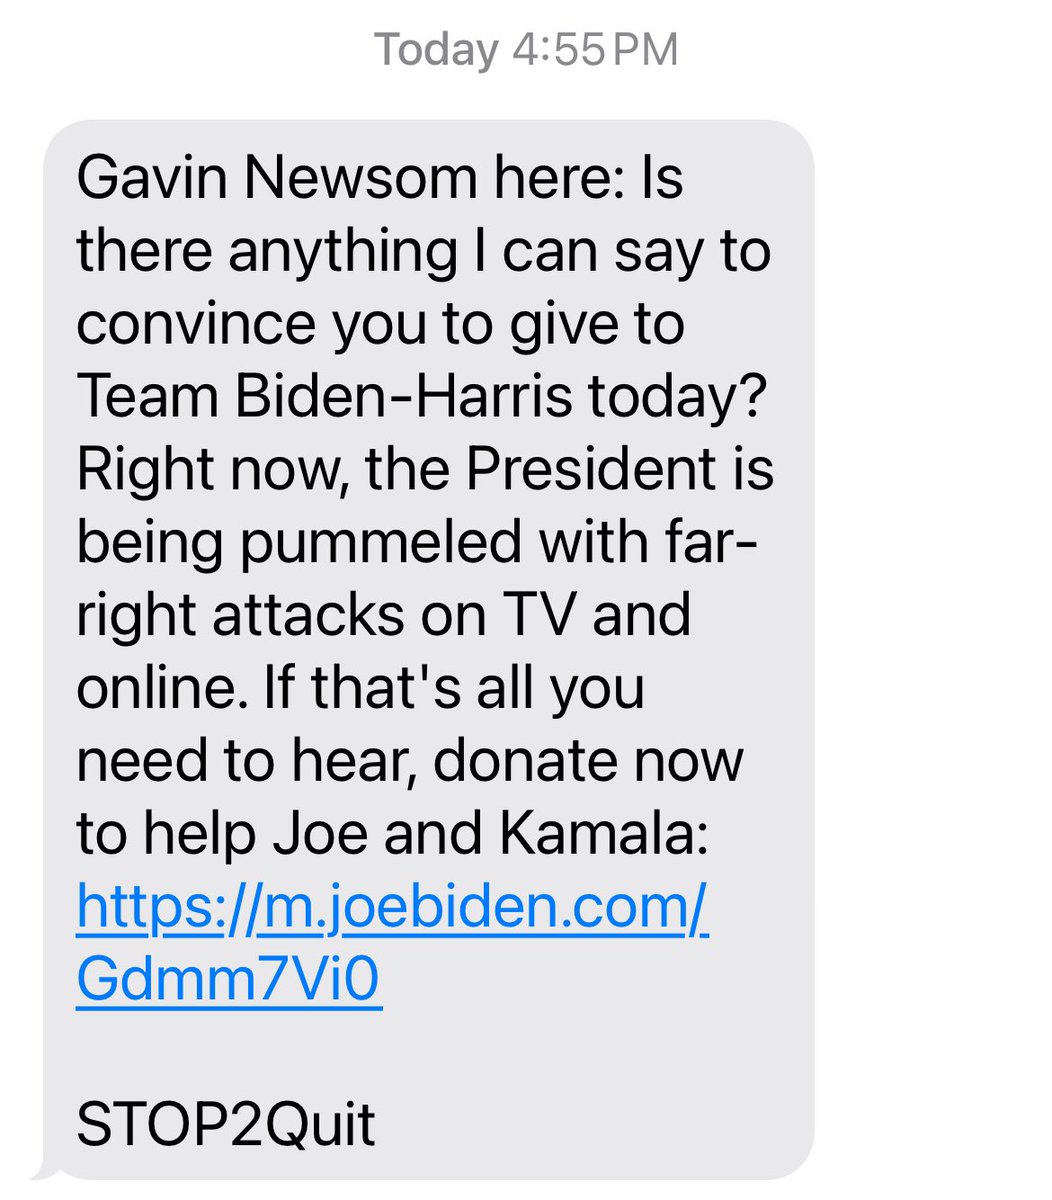 Keep your eye on this guy! I just got my first text from him asking for money! Gavin Newsom is supposed to be the next USA president. But how will they do this?